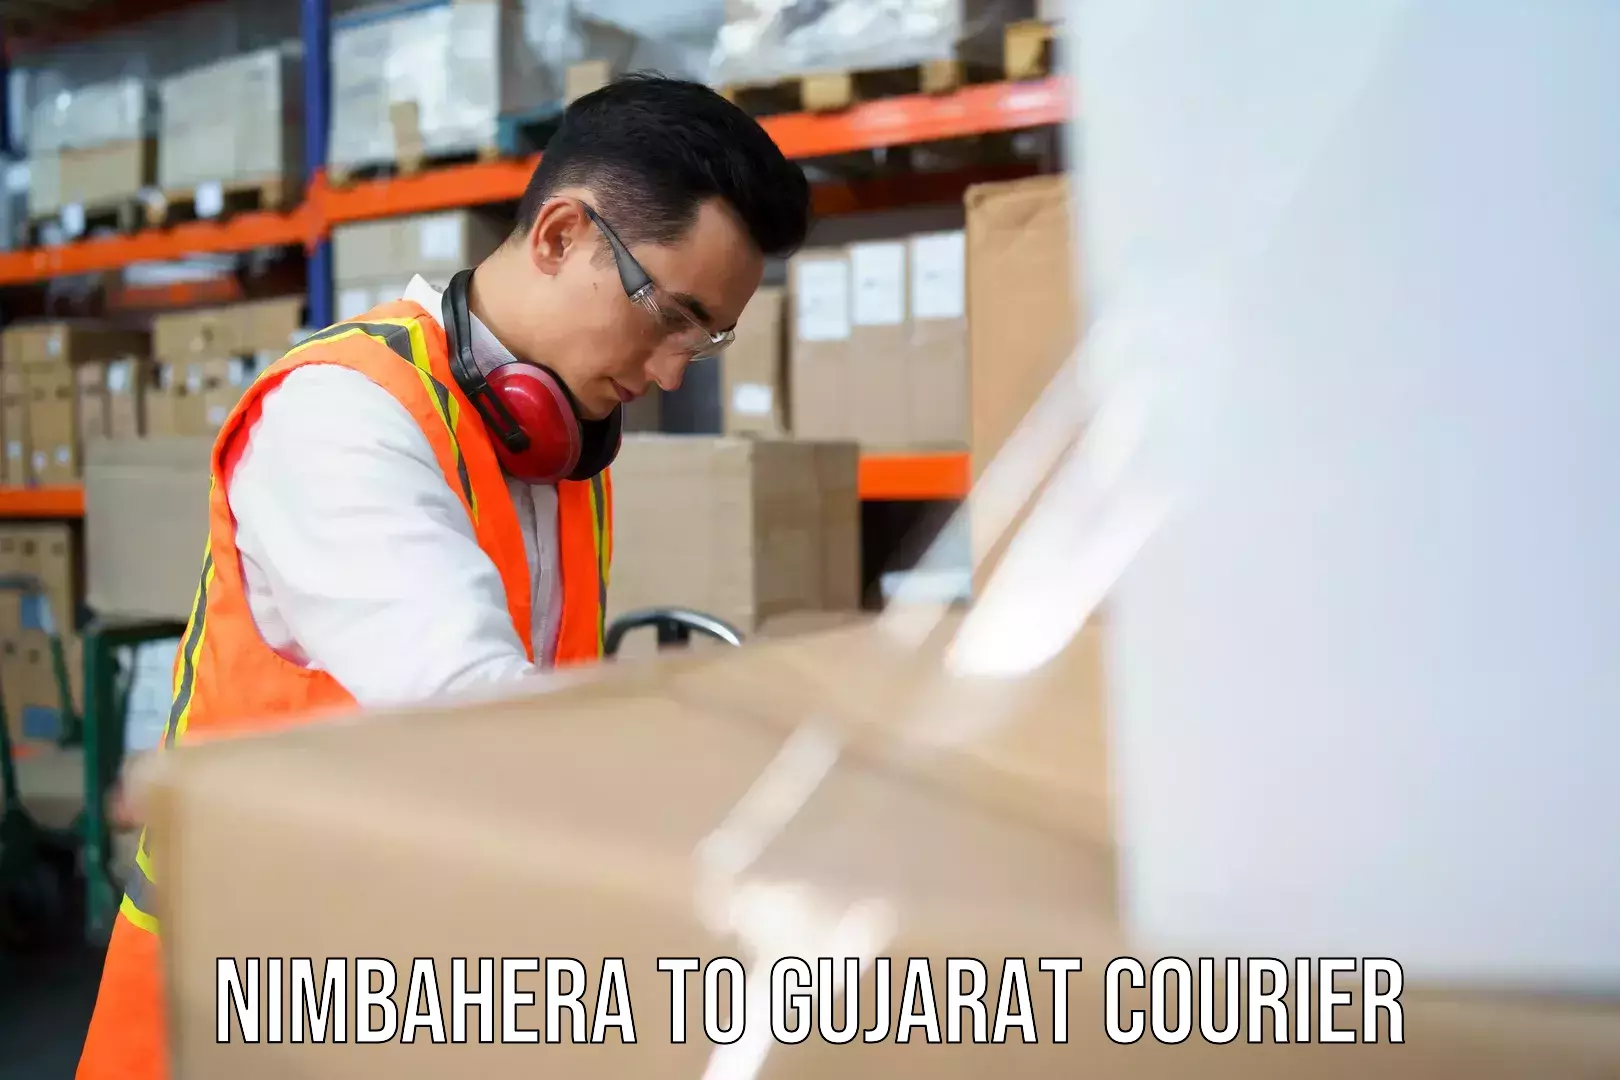 Global courier networks Nimbahera to Gujarat